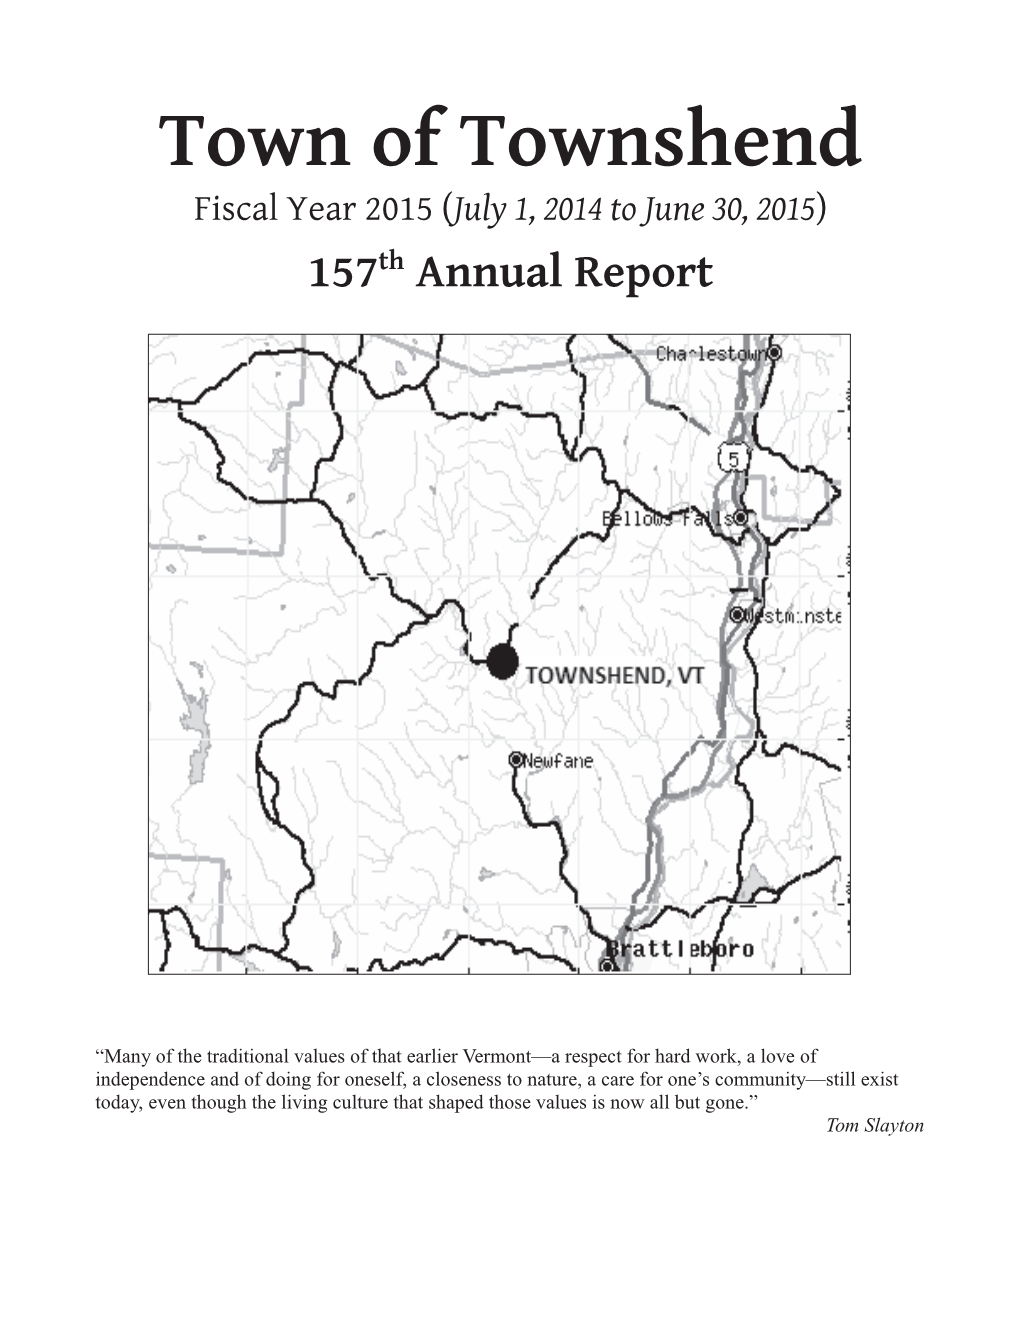 Town of Townshend Fiscal Year 2015 (July 1, 2014 to June 30, 2015) 157Th Annual Report